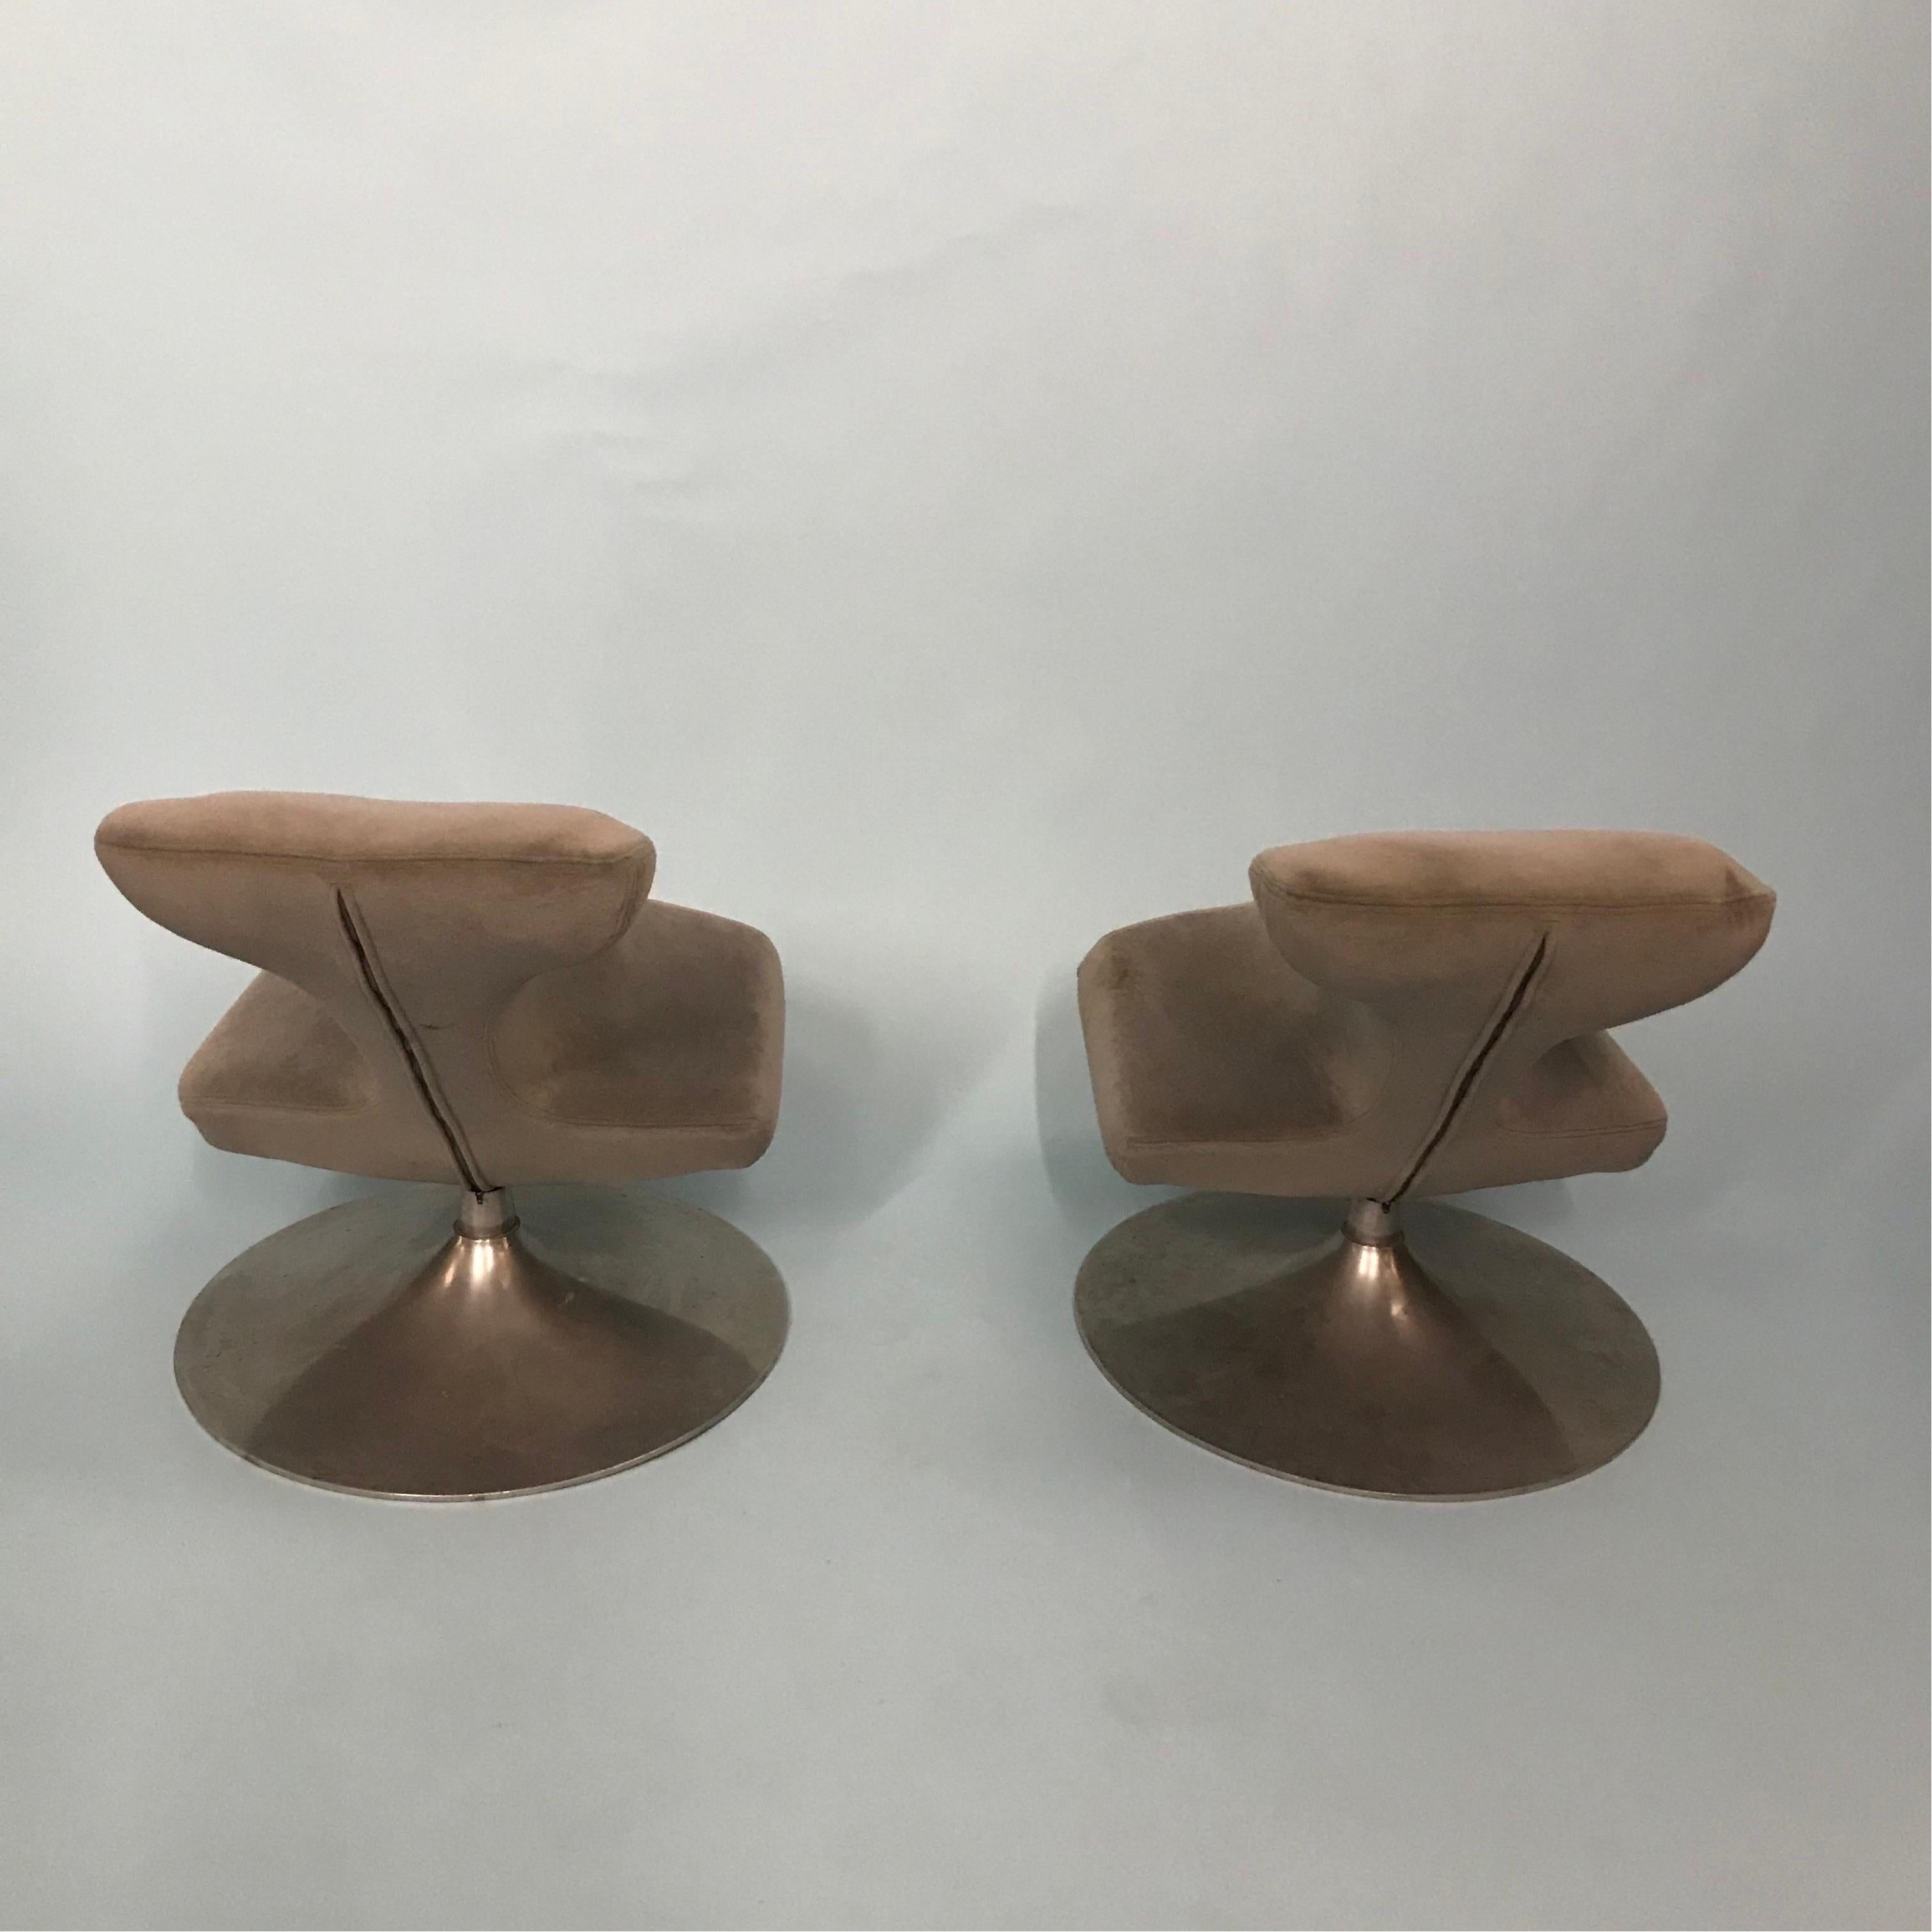 A Pair of 1970’s Radical Modern French Kneeling Stools attributed to Artifort In Good Condition For Sale In Fort mill, SC